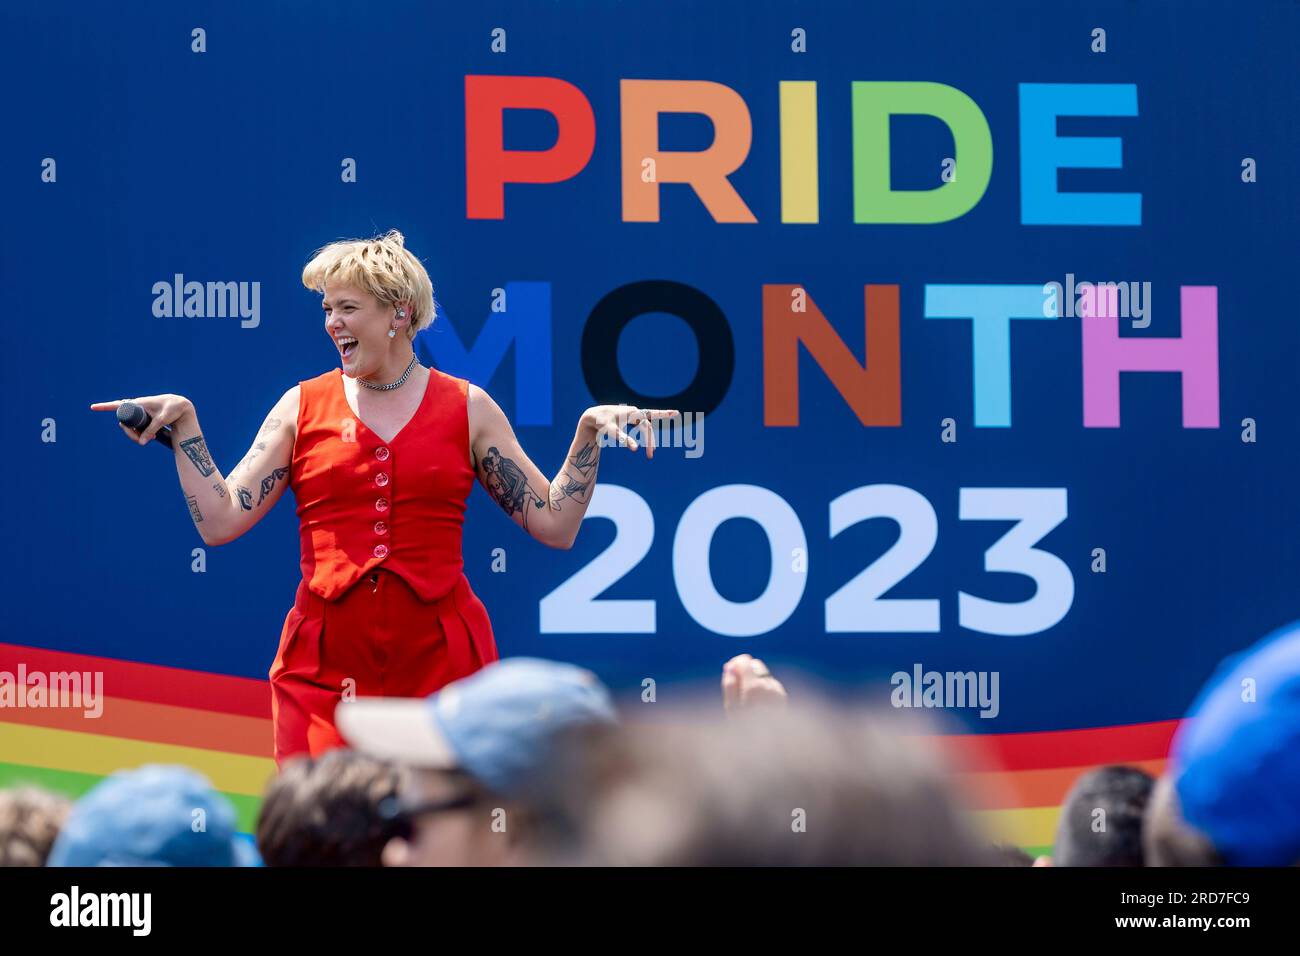 Washington, United States of America. 10 June, 2023. Musician Betty Who performs at a Pride celebration on the South Lawn of the White House, June 10, 2023 in Washington, D.C. Credit: Carlos Fyfe/White House Photo/Alamy Live News Stock Photo